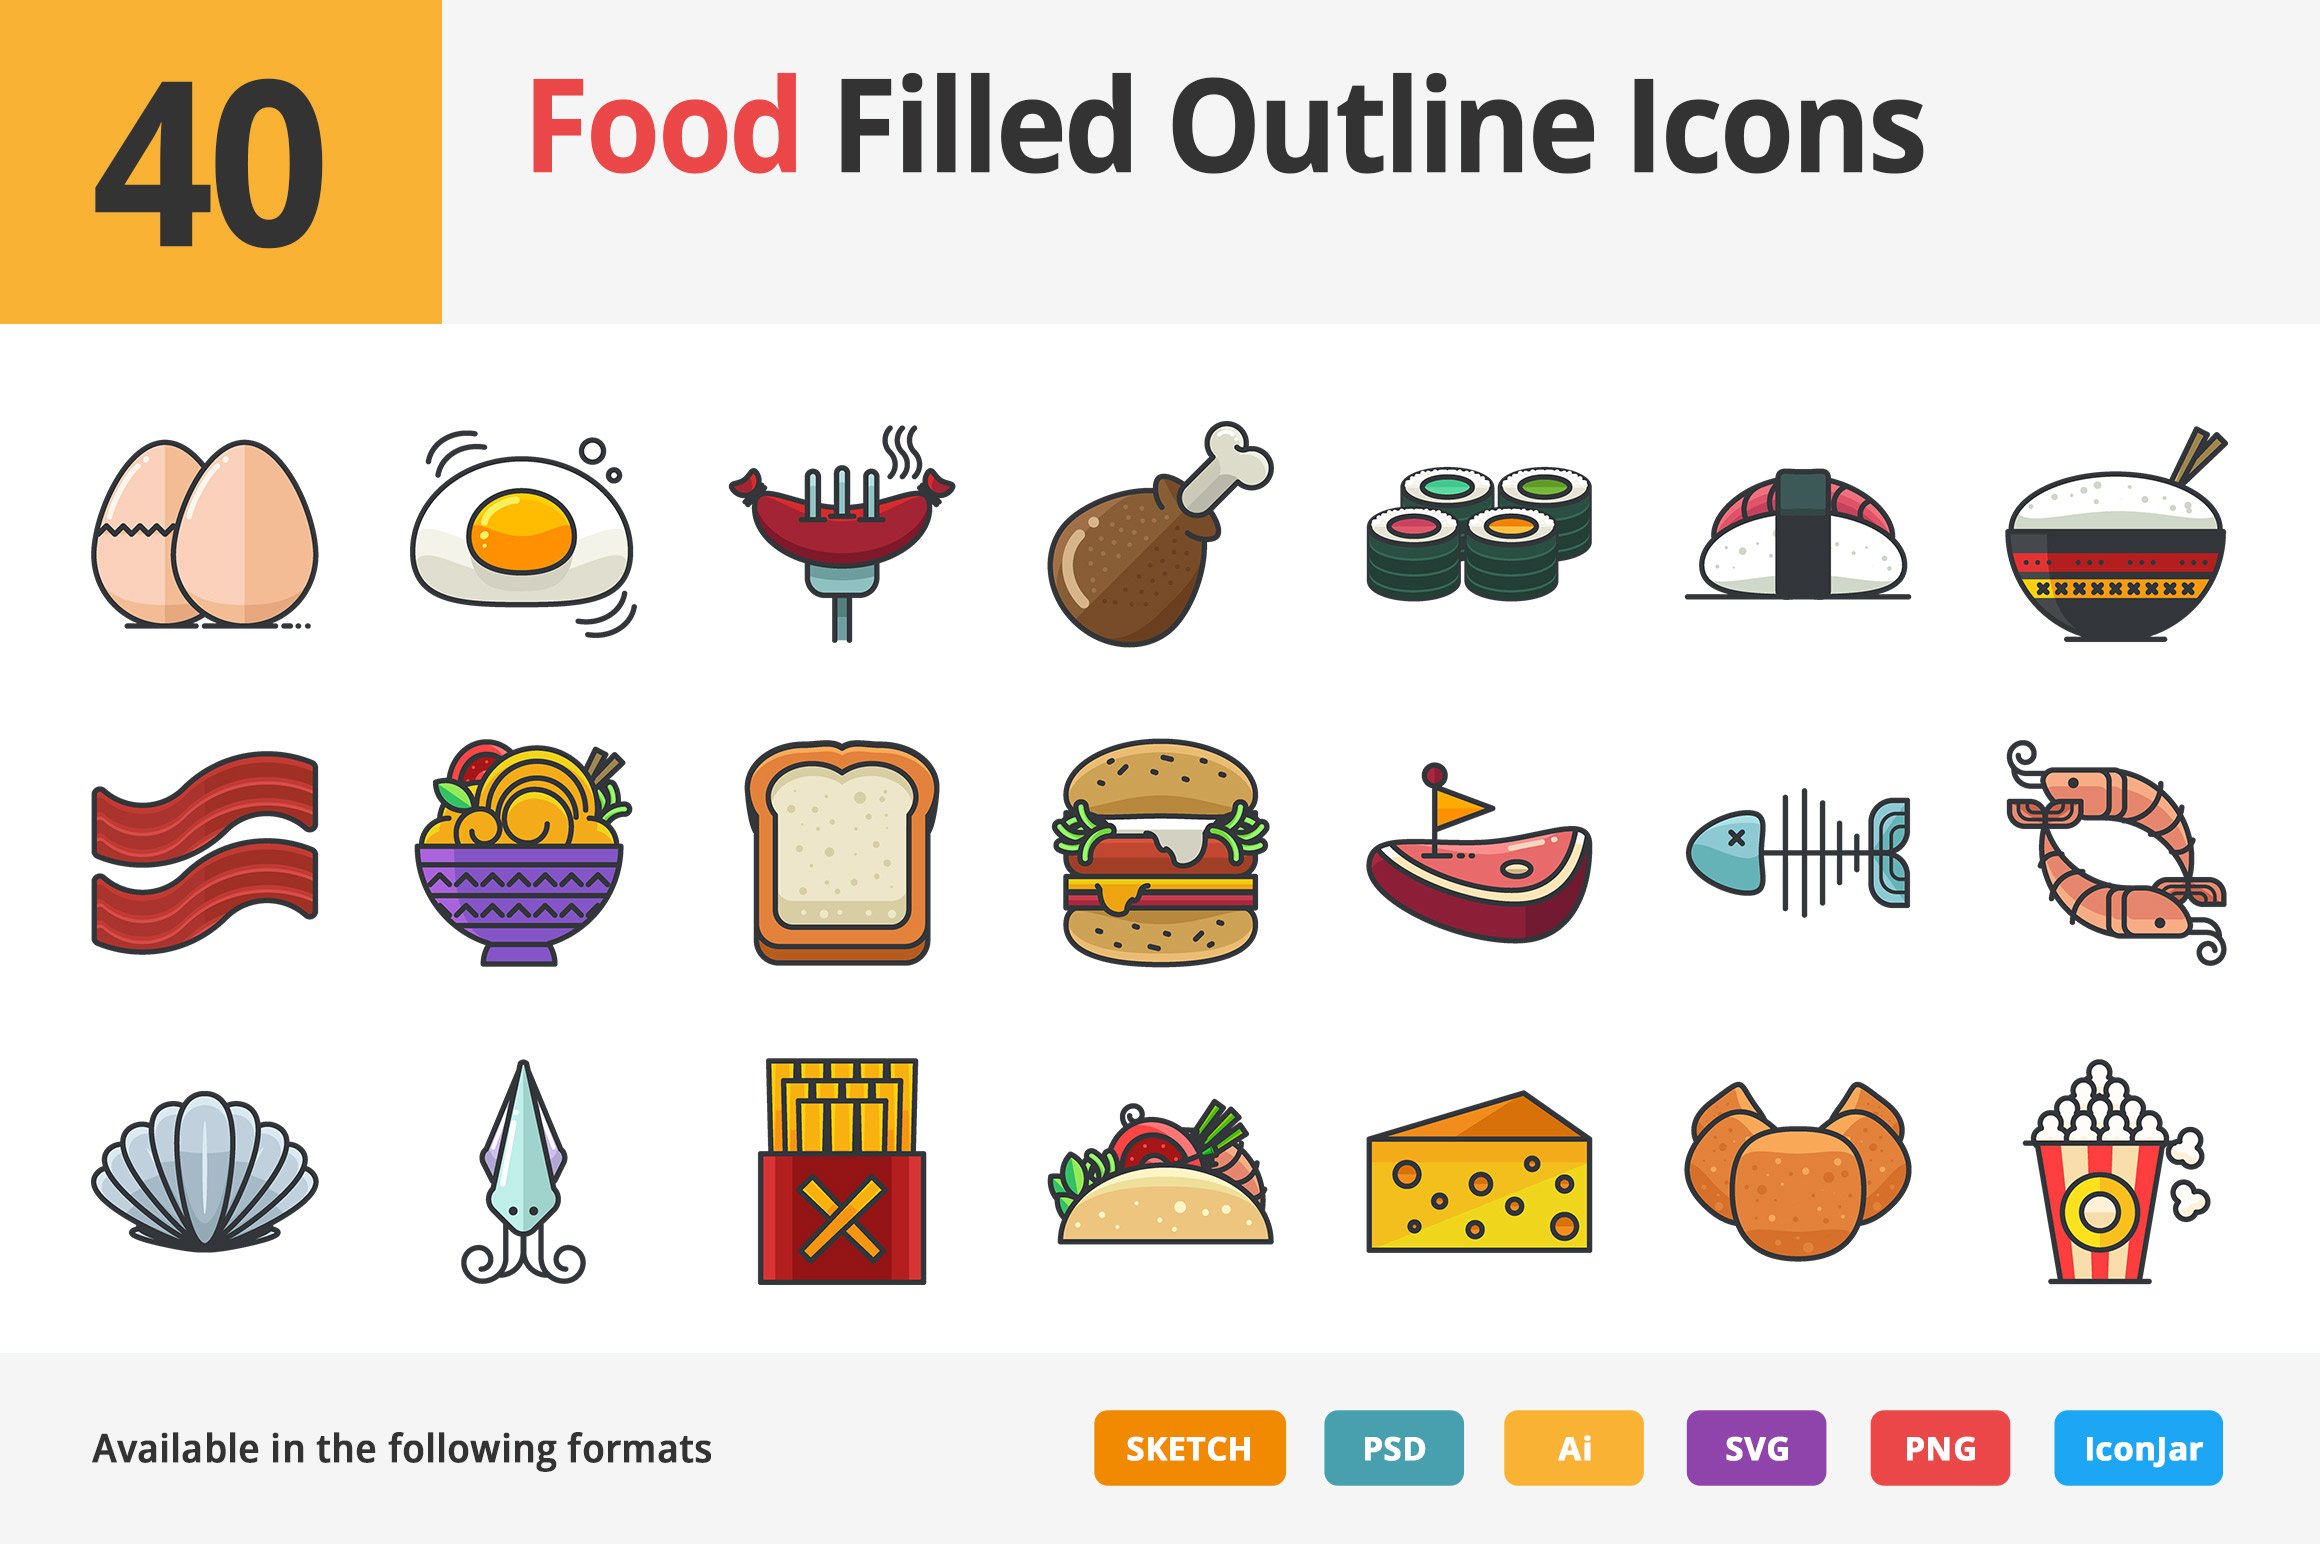 40 Food Filled Outline Icons preview image.